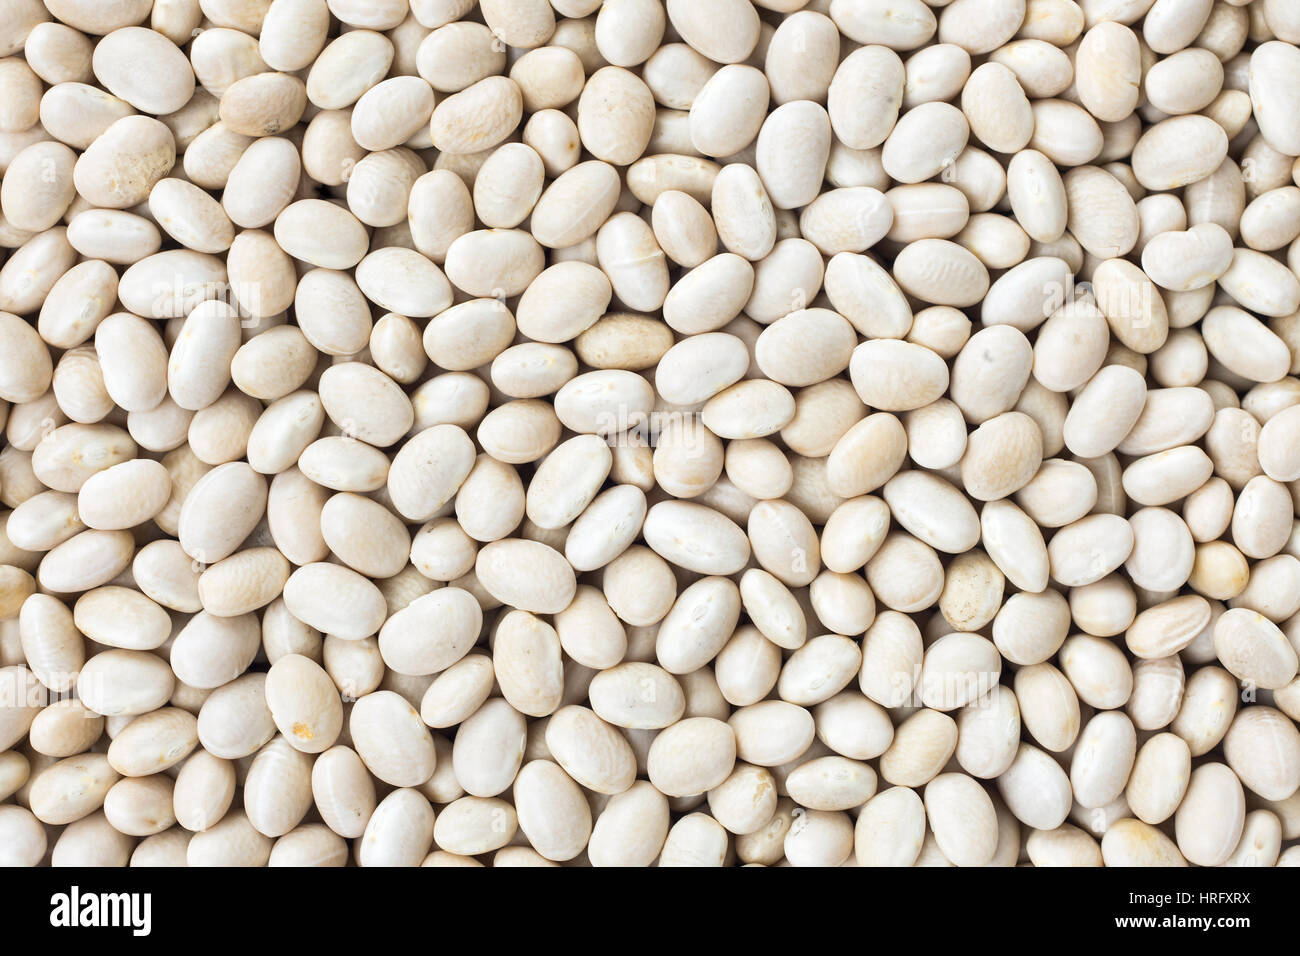 Small Navy, haricot, white pea, white kidney or Cannellini Purgatorio beans texture background or pattern. Raw legume food. Stock Photo